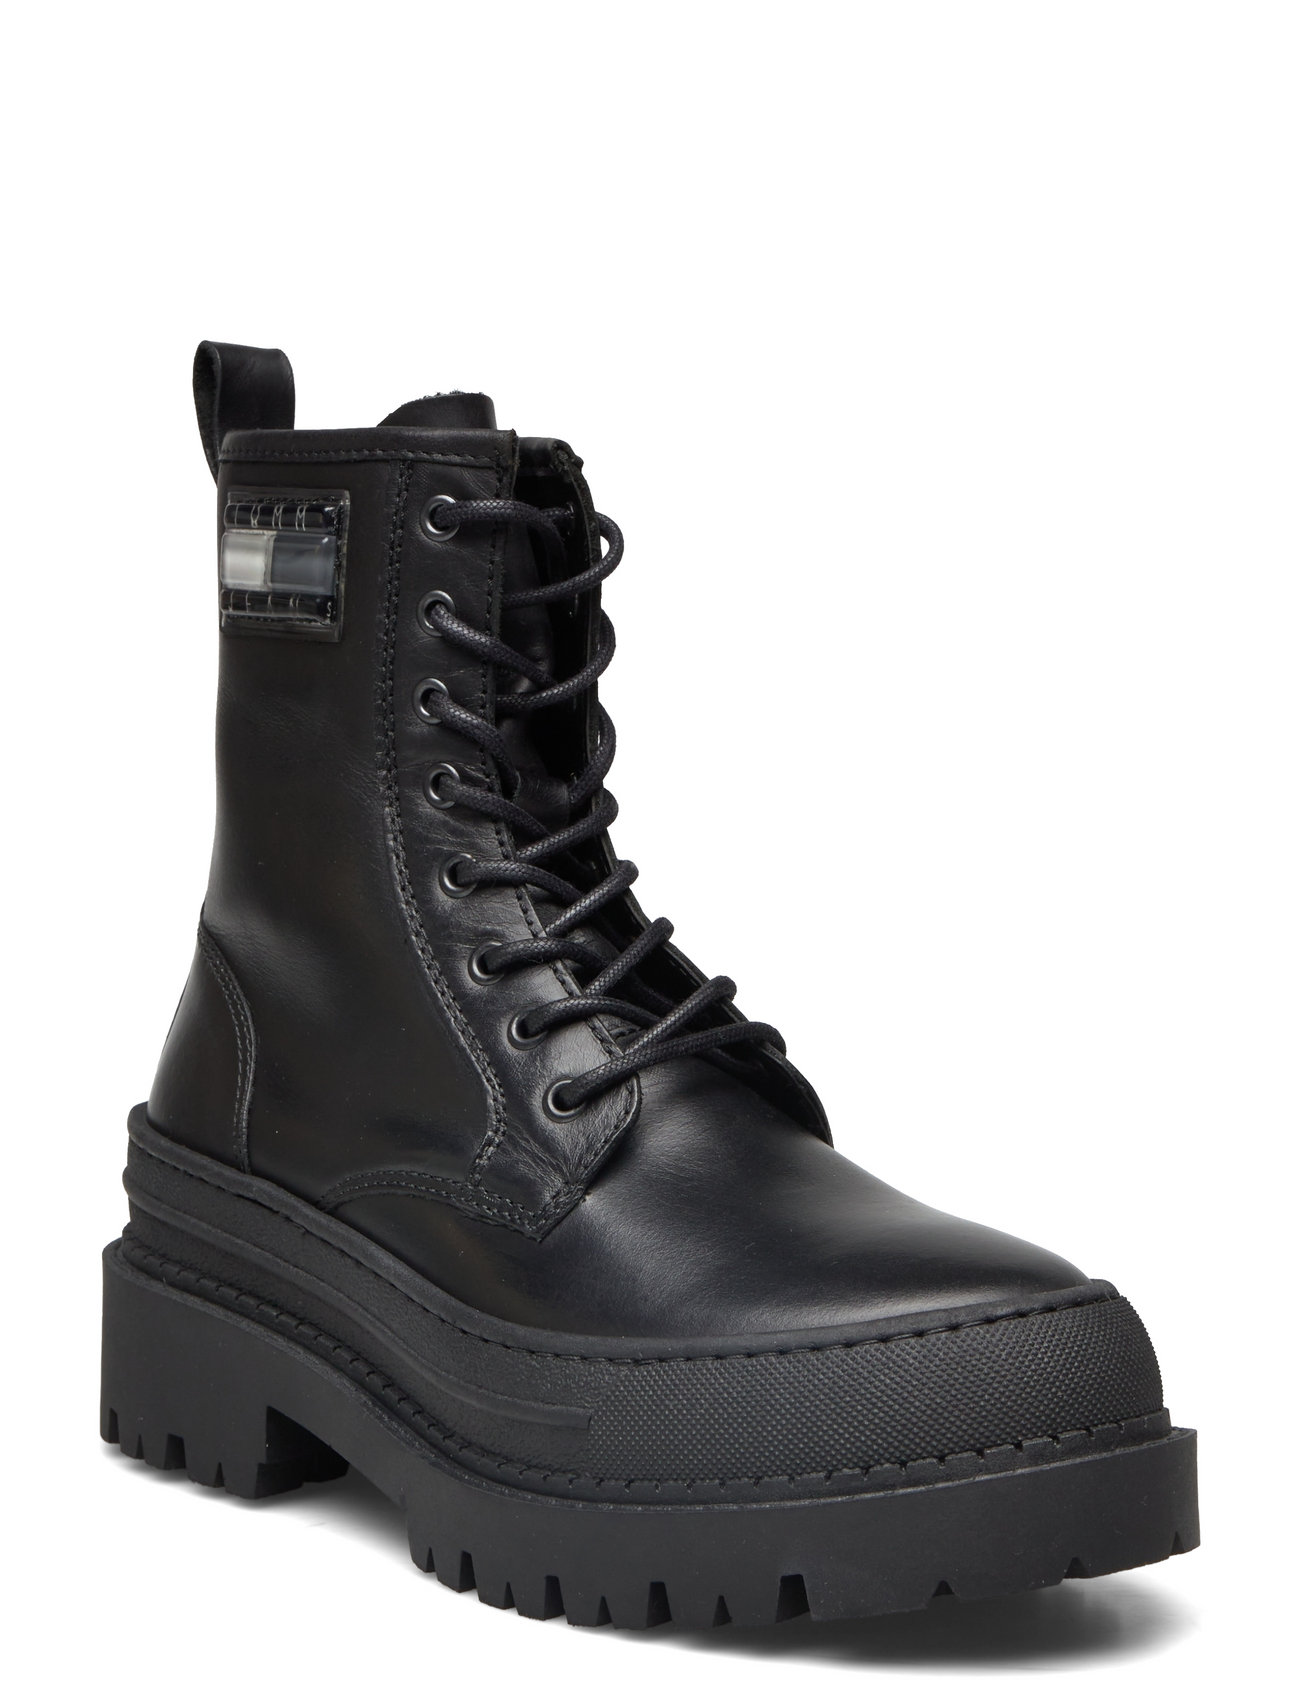 Tommy Hilfiger Tjw Foxing Lace Up Leather Boot - Bottines - Boozt.com